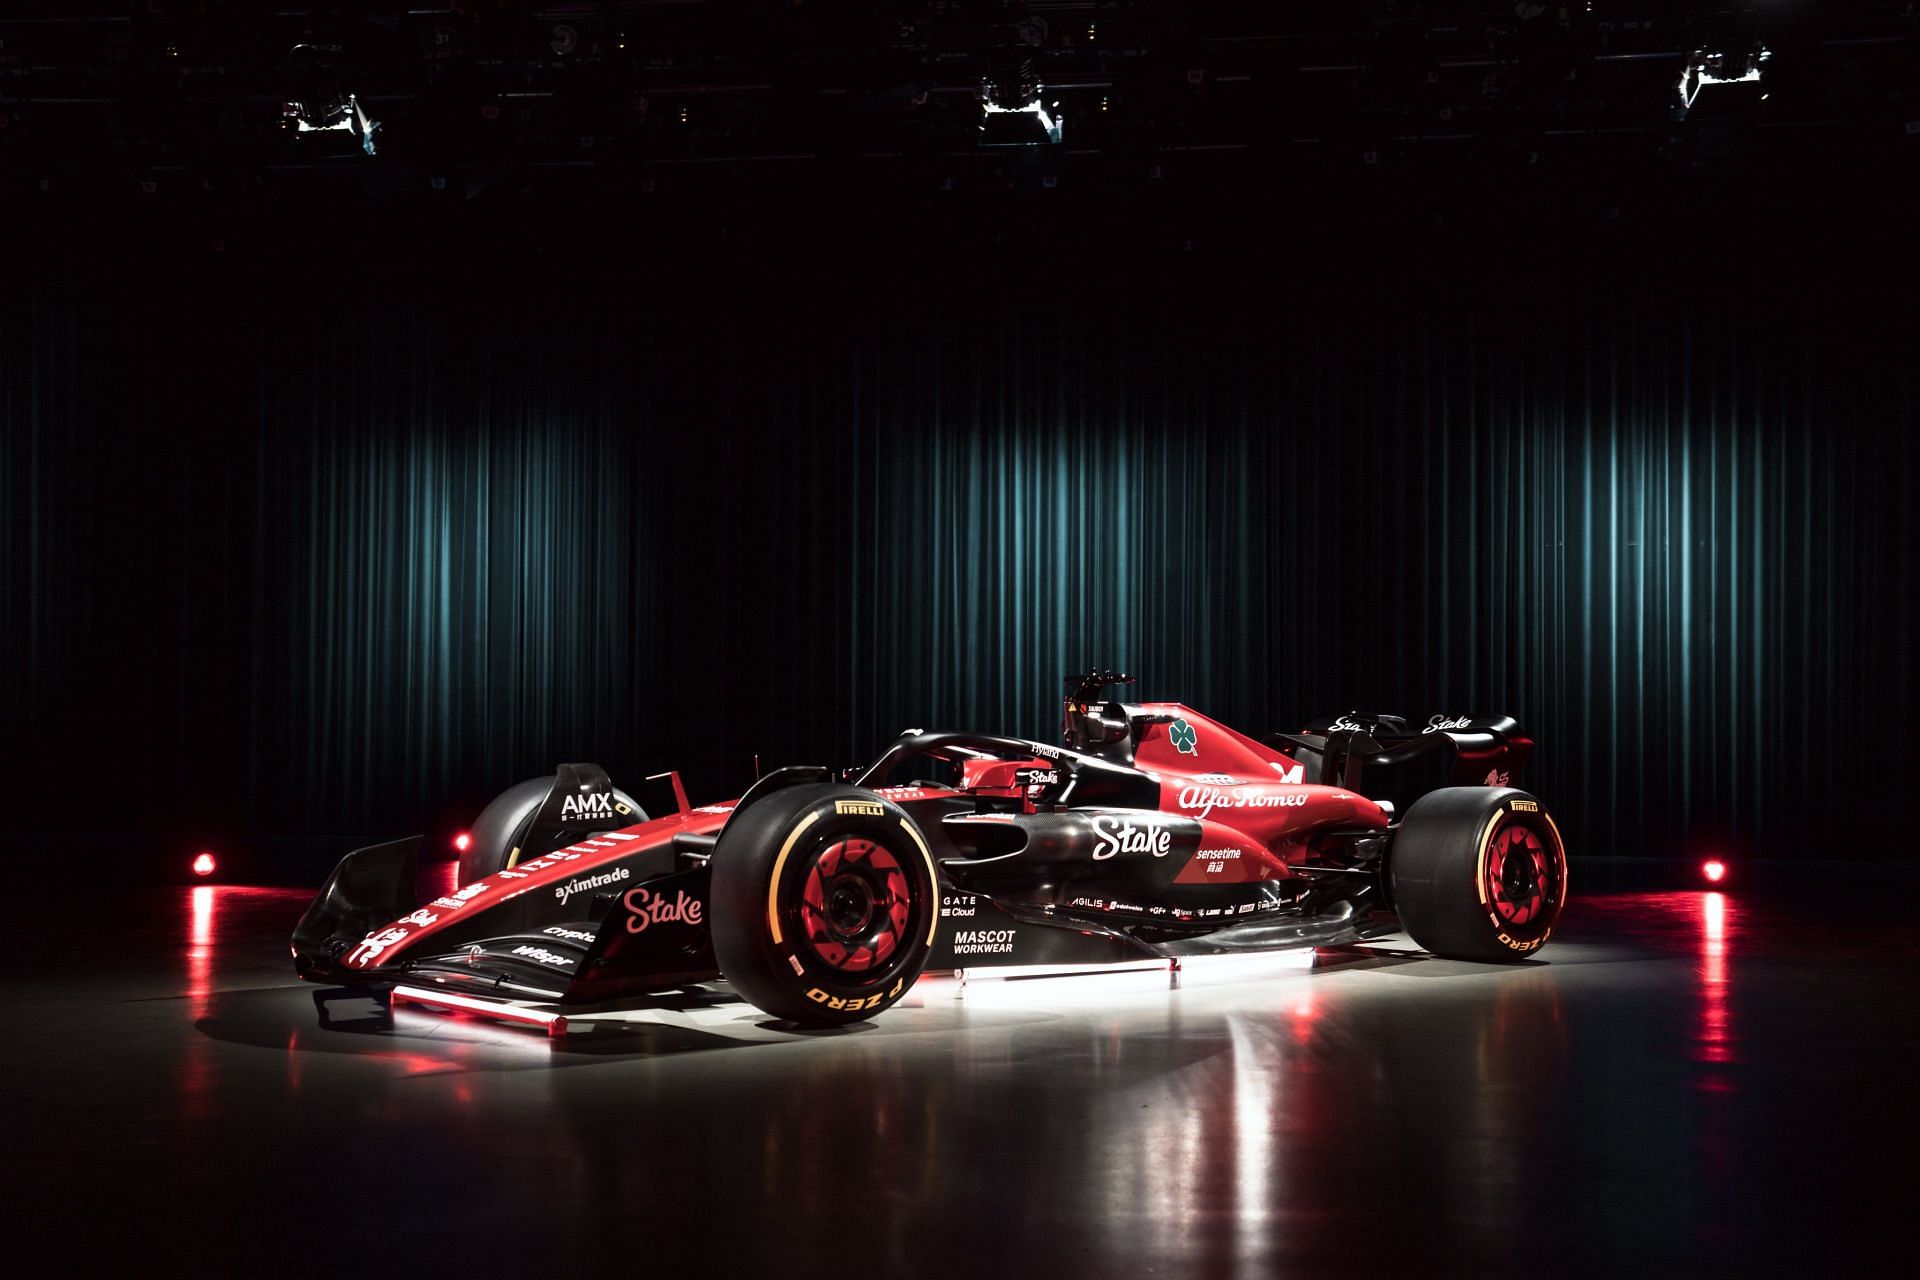 The new Alfa Romeo sponsor could land the team in trouble